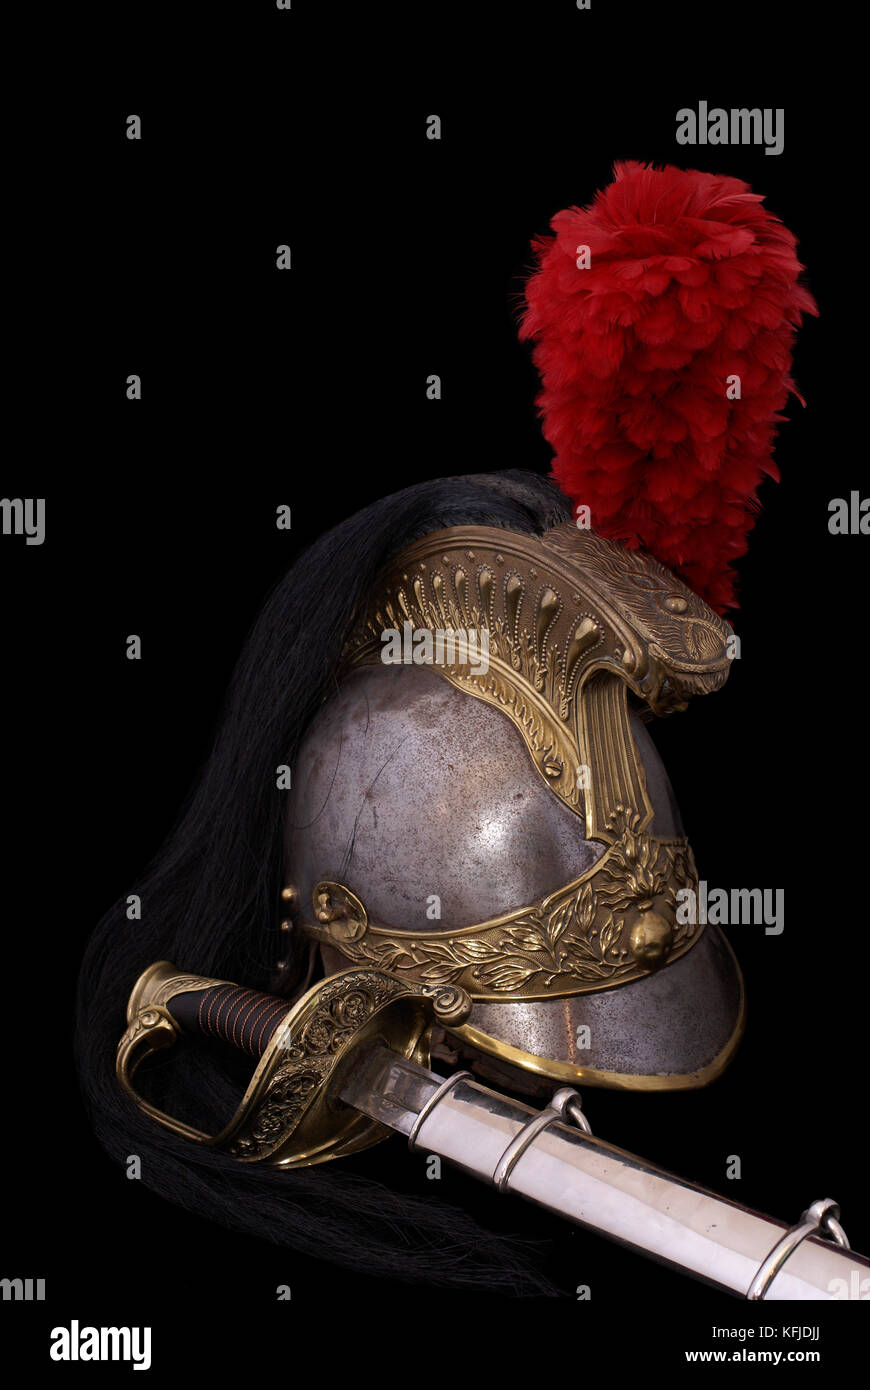 Composition with saber (sabre, cavalry sword) of French infantry officer (model 1855) and French cuirassier helmet (1836). Path on dark background. Stock Photo